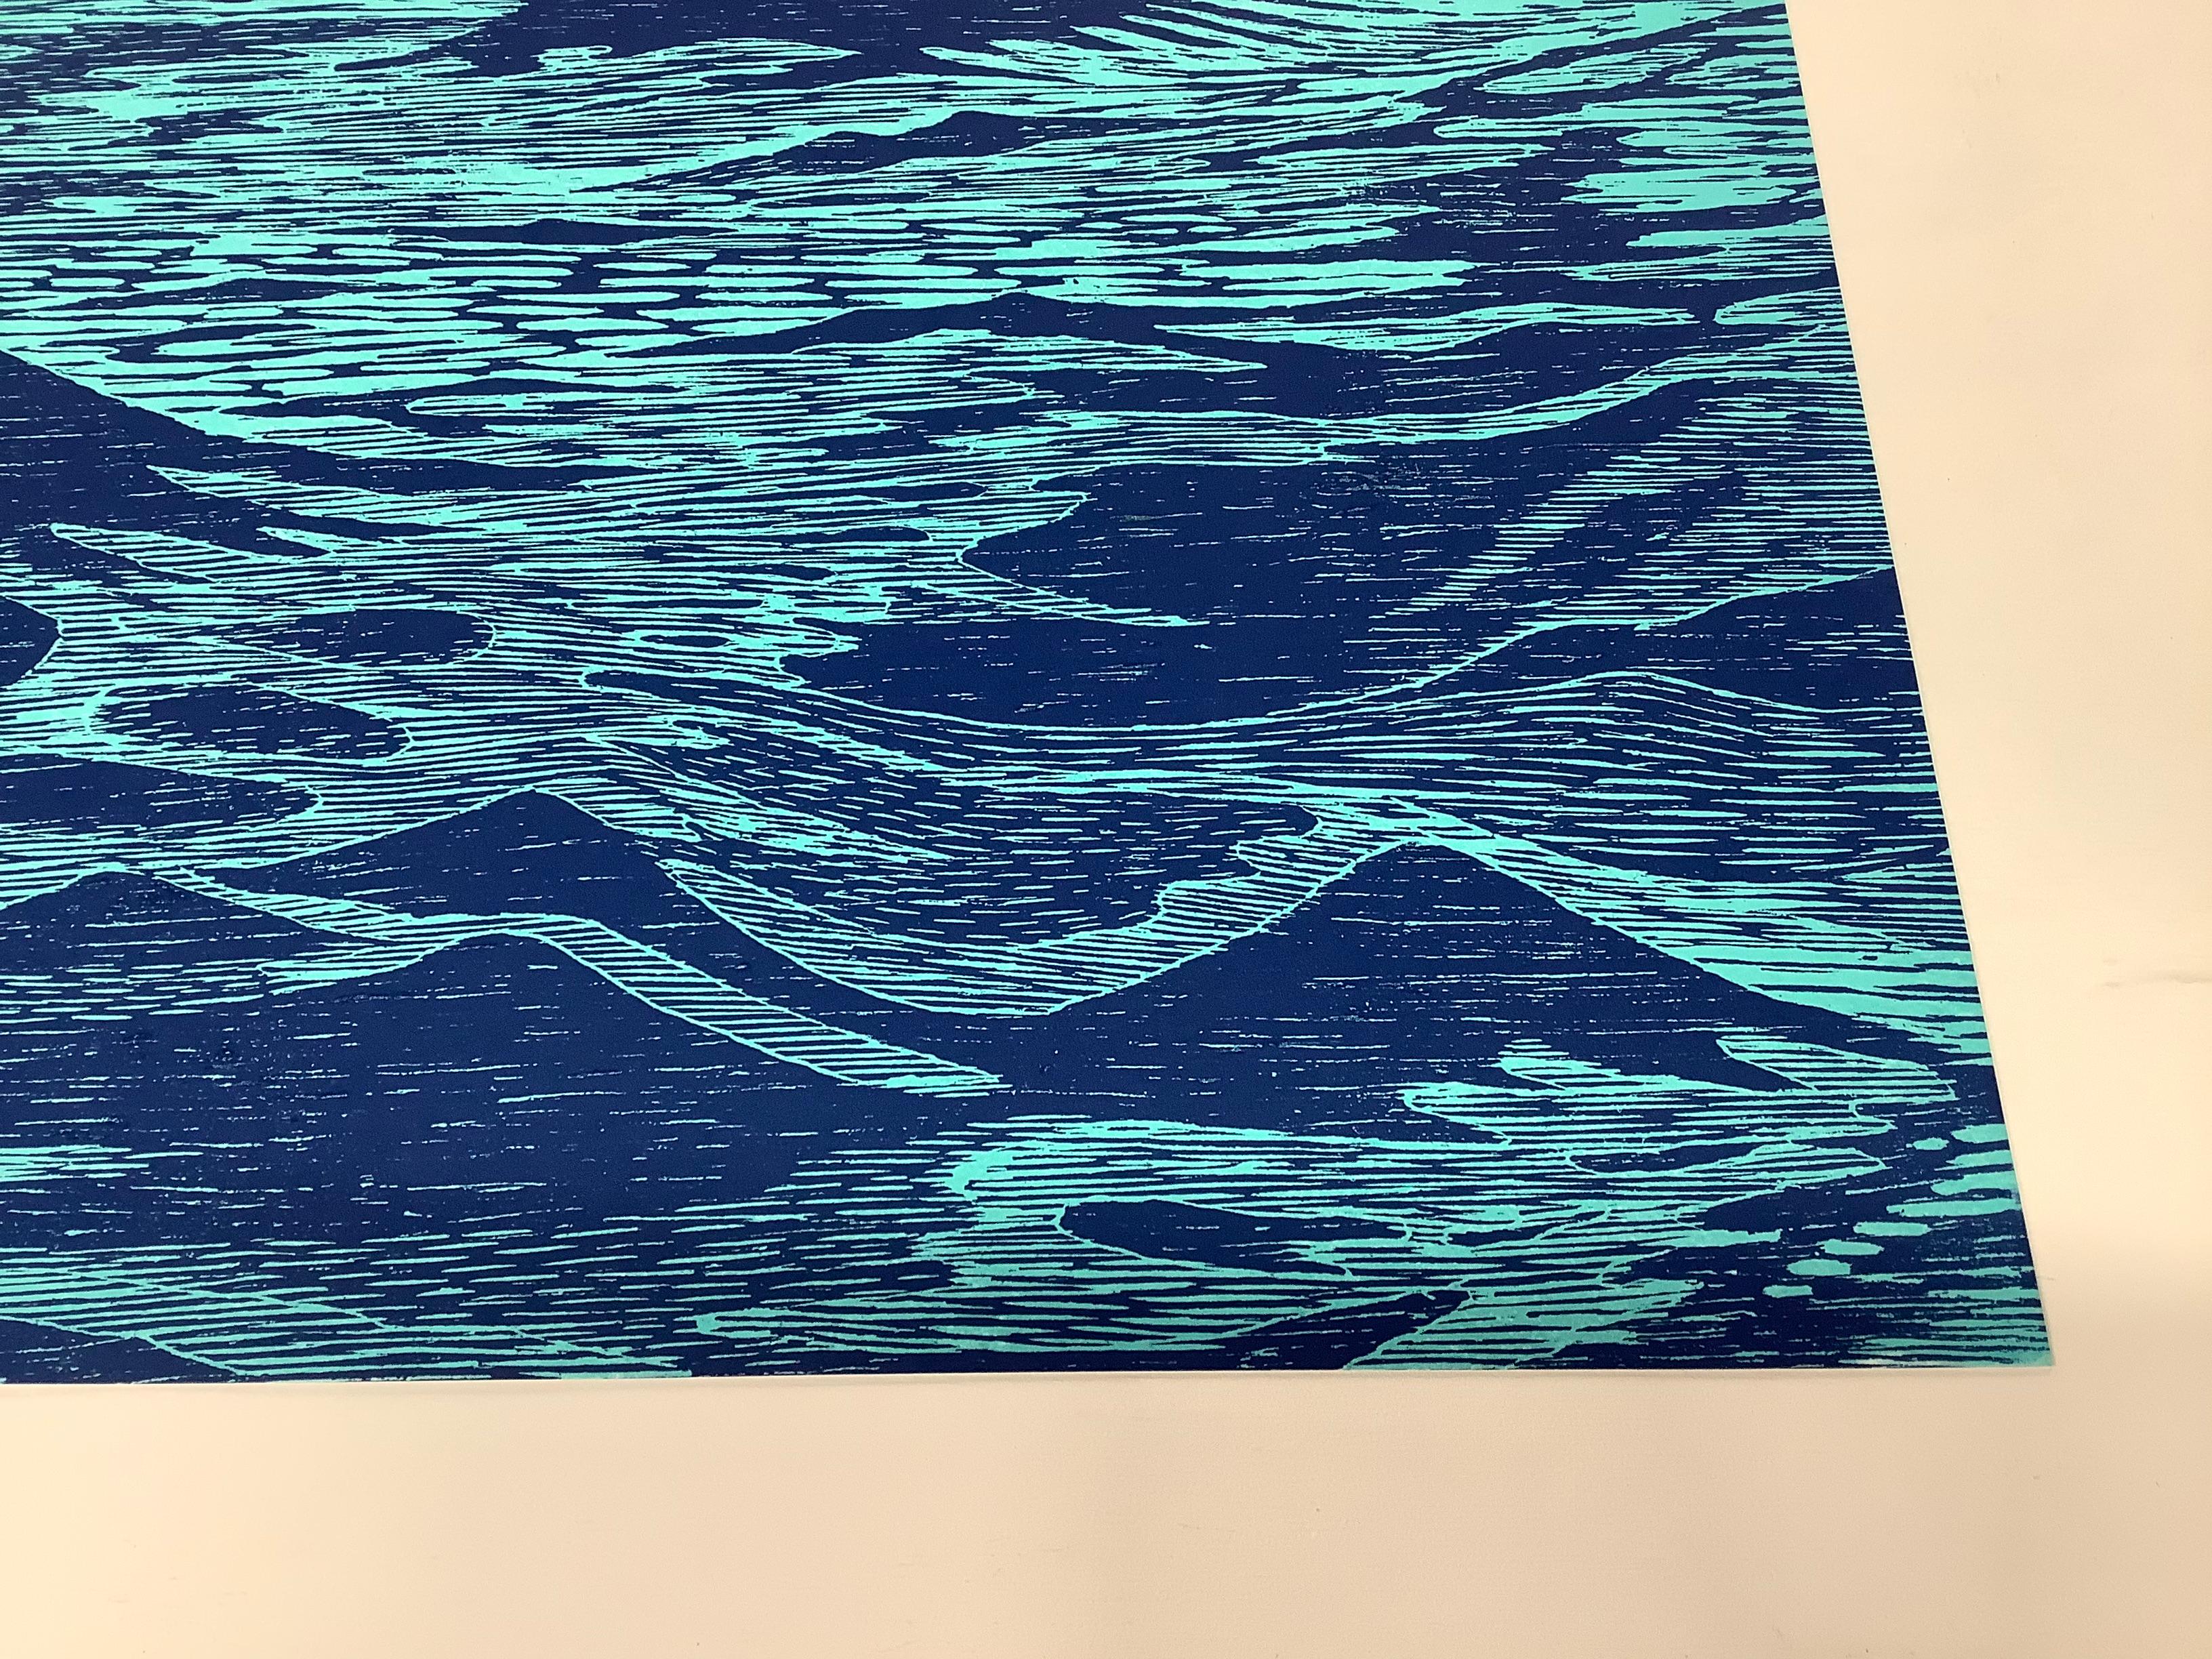 Big Seascape XII Left, Ocean Waves Woodcut Print in Shades of Blue 1